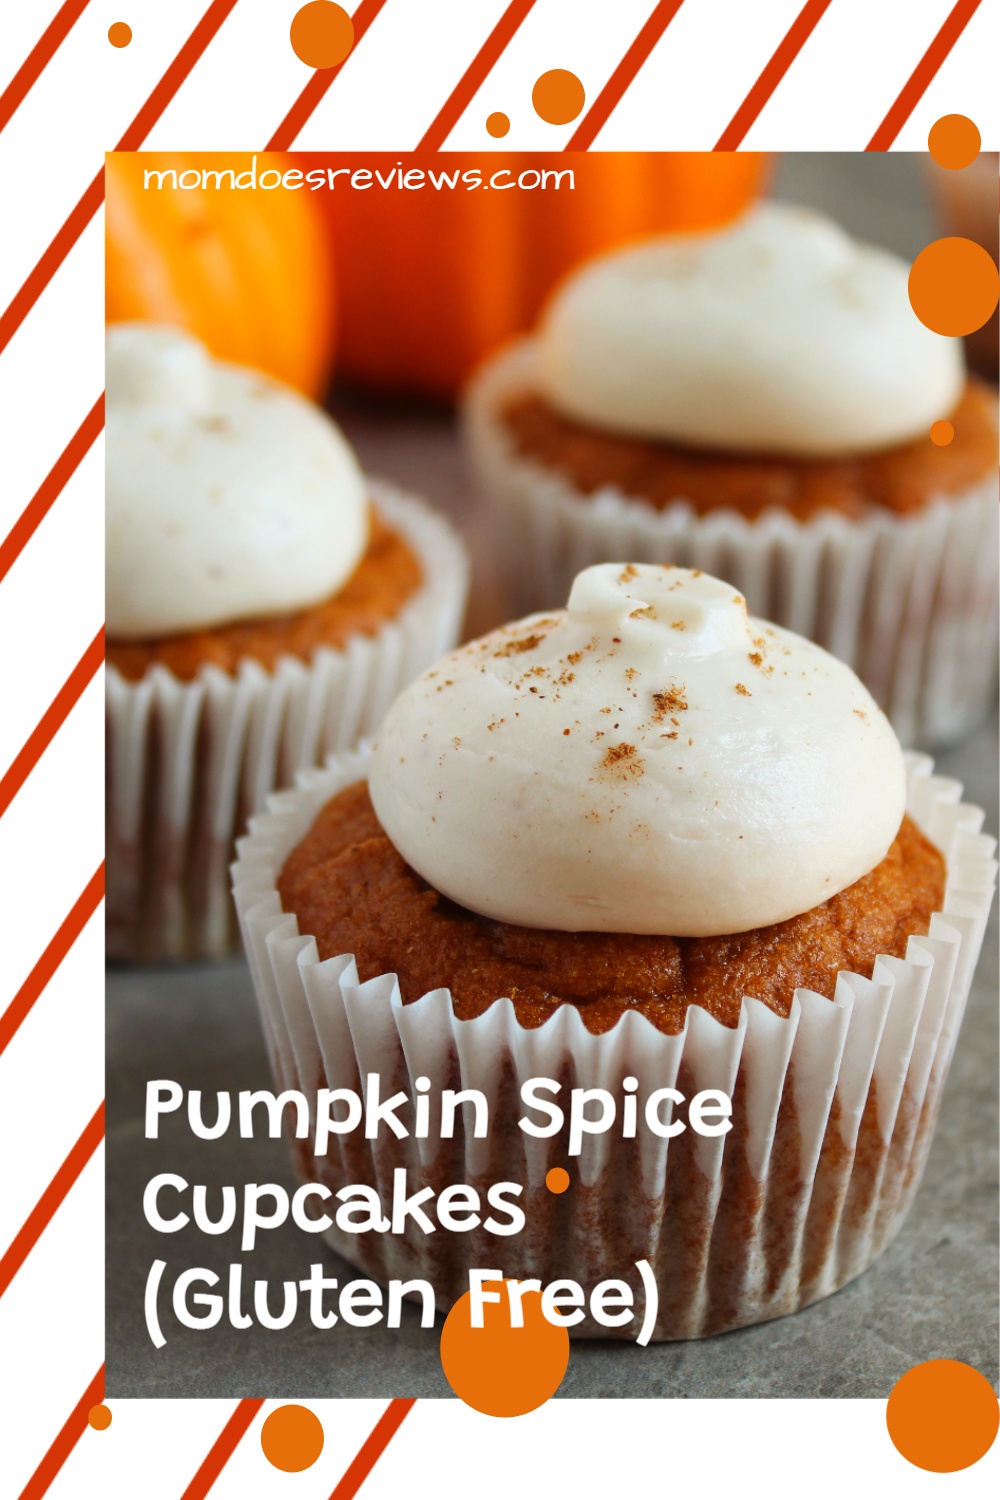 Pumpkin Spice Cupcakes with Cream Cheese Frosting (Gluten Free)